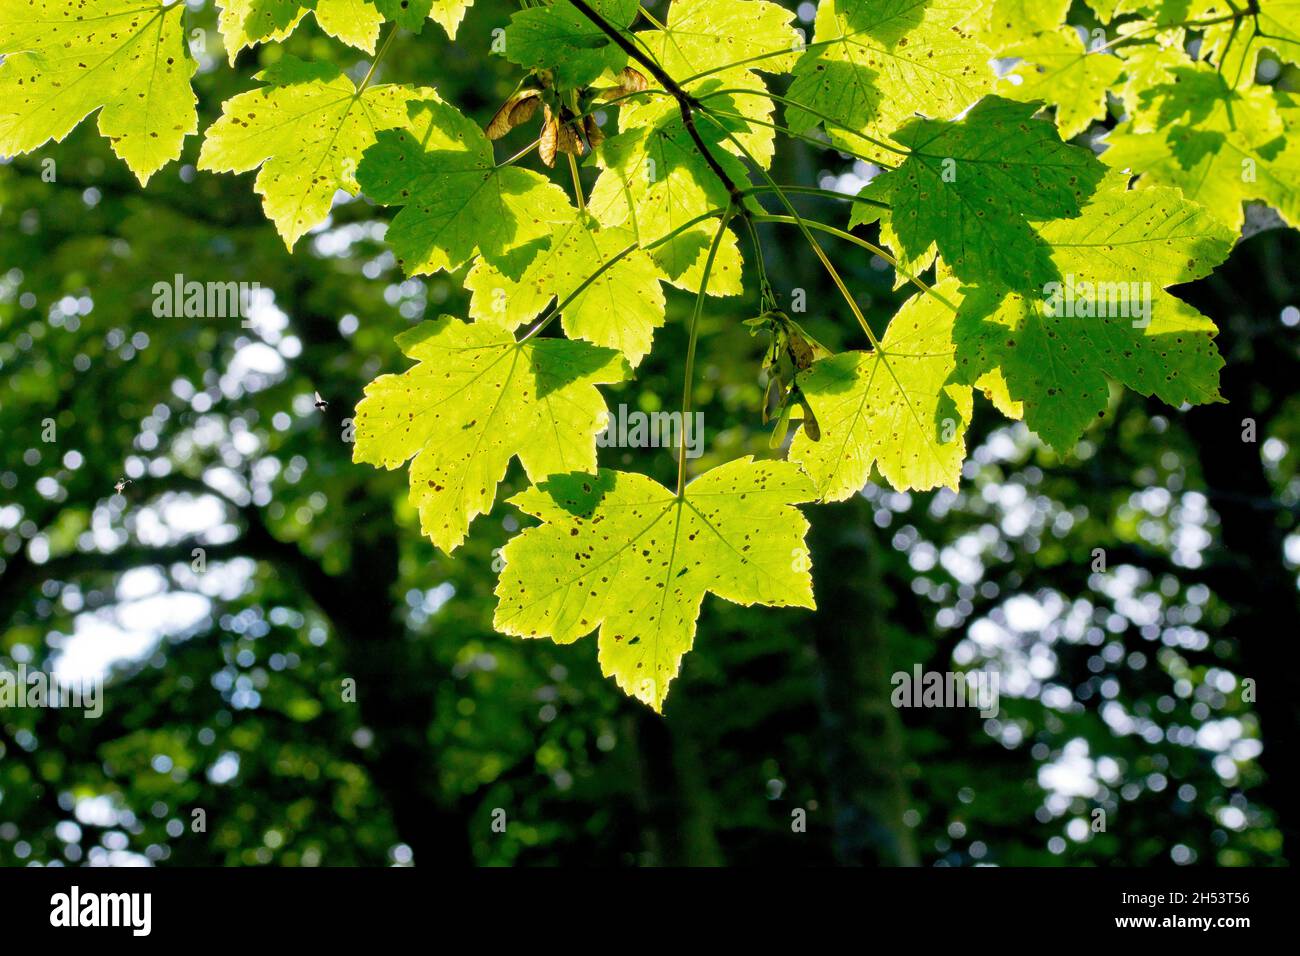 Sycamore (acer pseudoplatanus), close up showing a branch of green leaves of the tree, back lit against the dark of other trees. Stock Photo